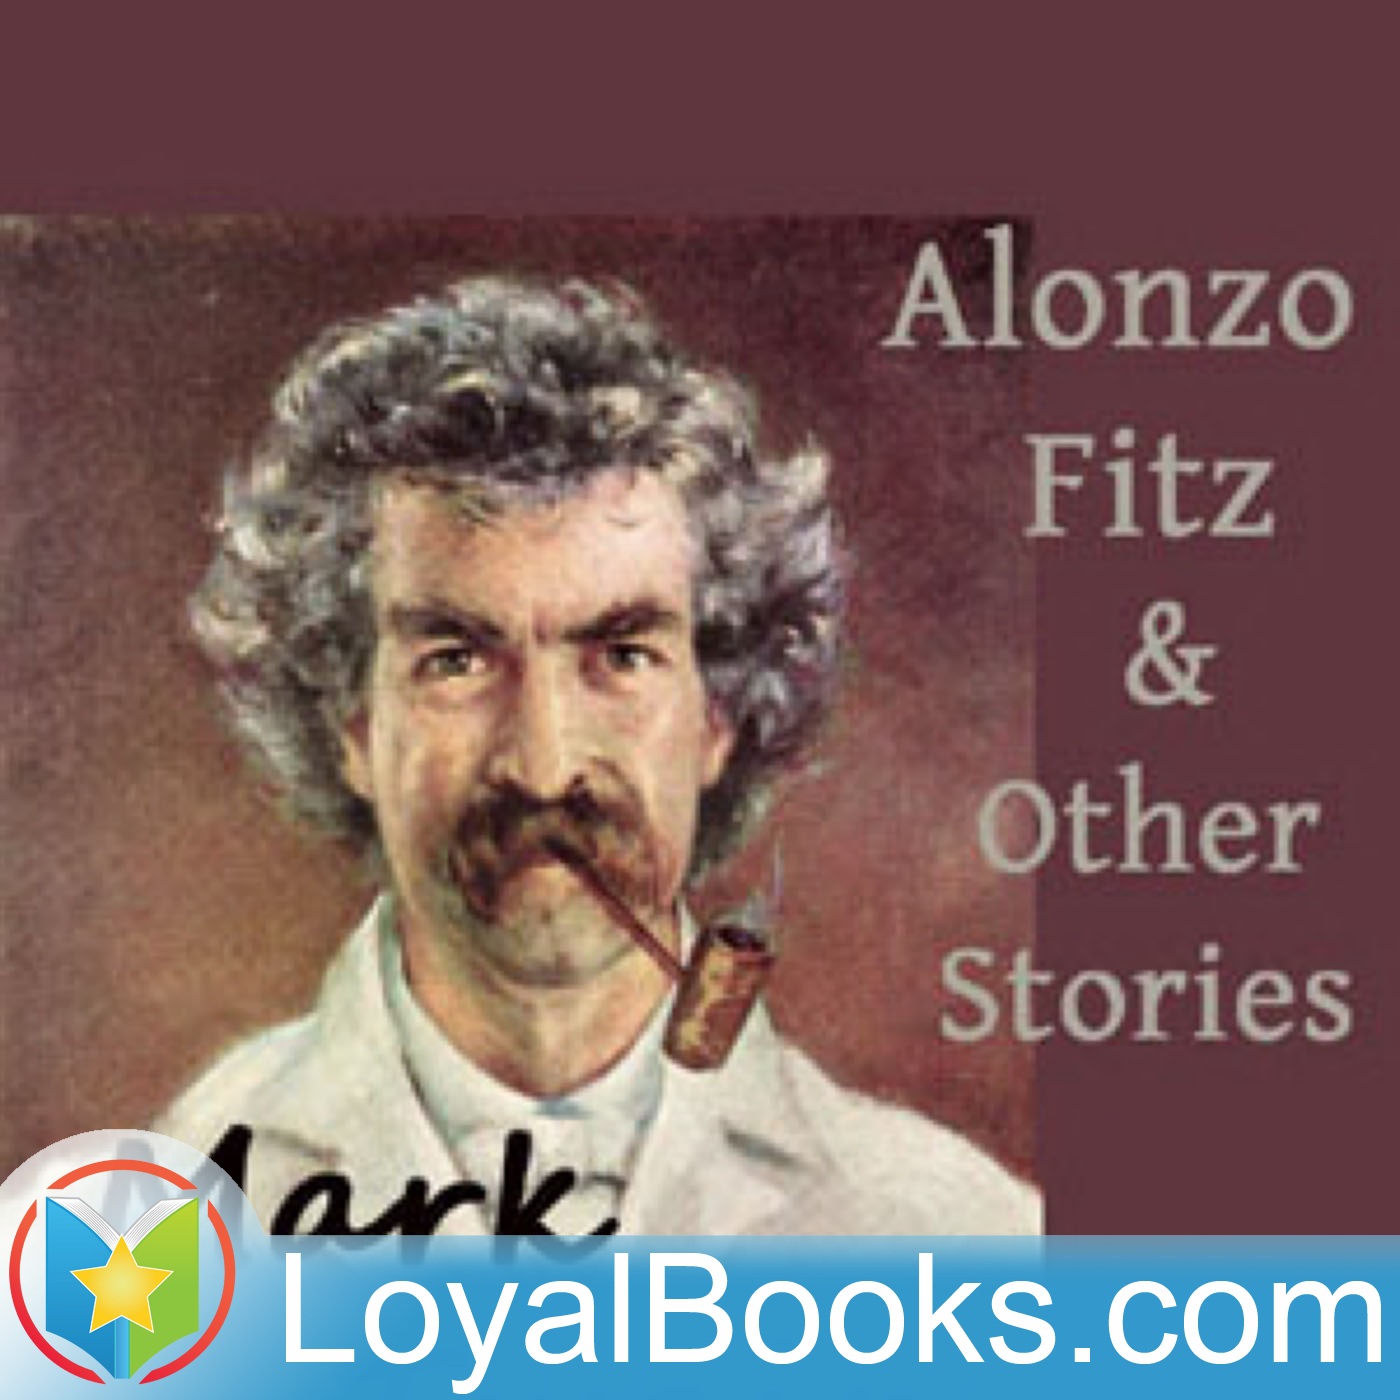 Alonso Fitz and Other Stories by Mark Twain